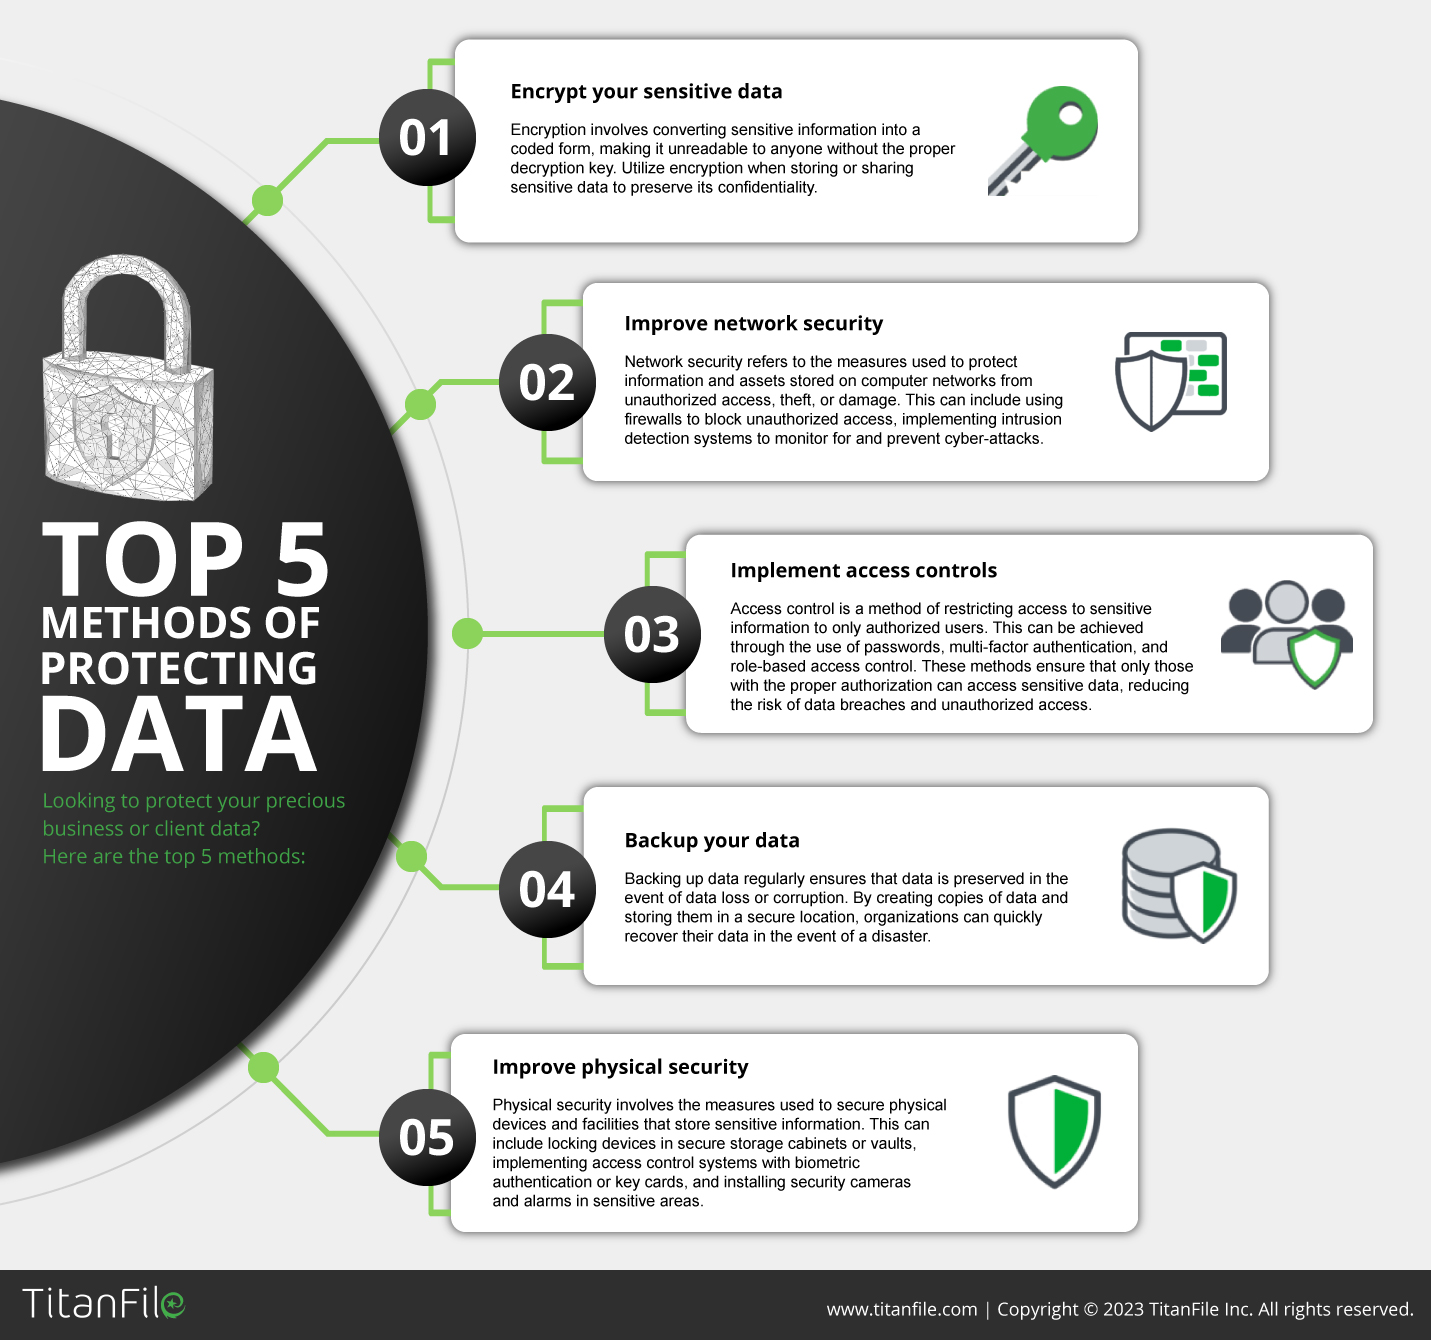 Top 5 Methods of Protecting Data